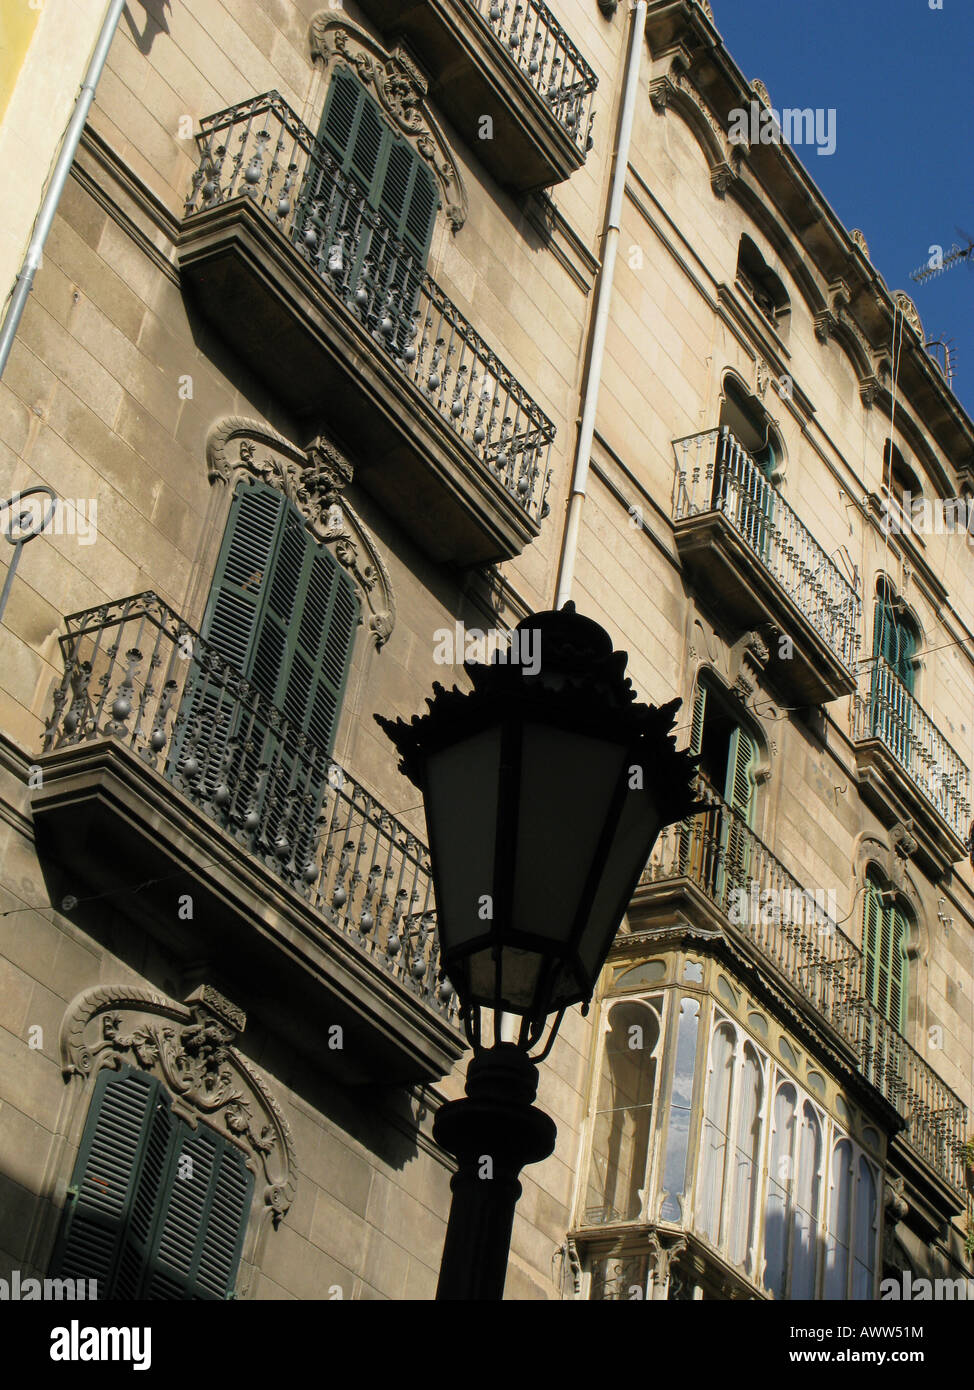 Decorative street lamp silhouette, against a background of ornate iron balconies and an enclosed window balcony. Apartment block Palma, Mallorca Spain Stock Photo